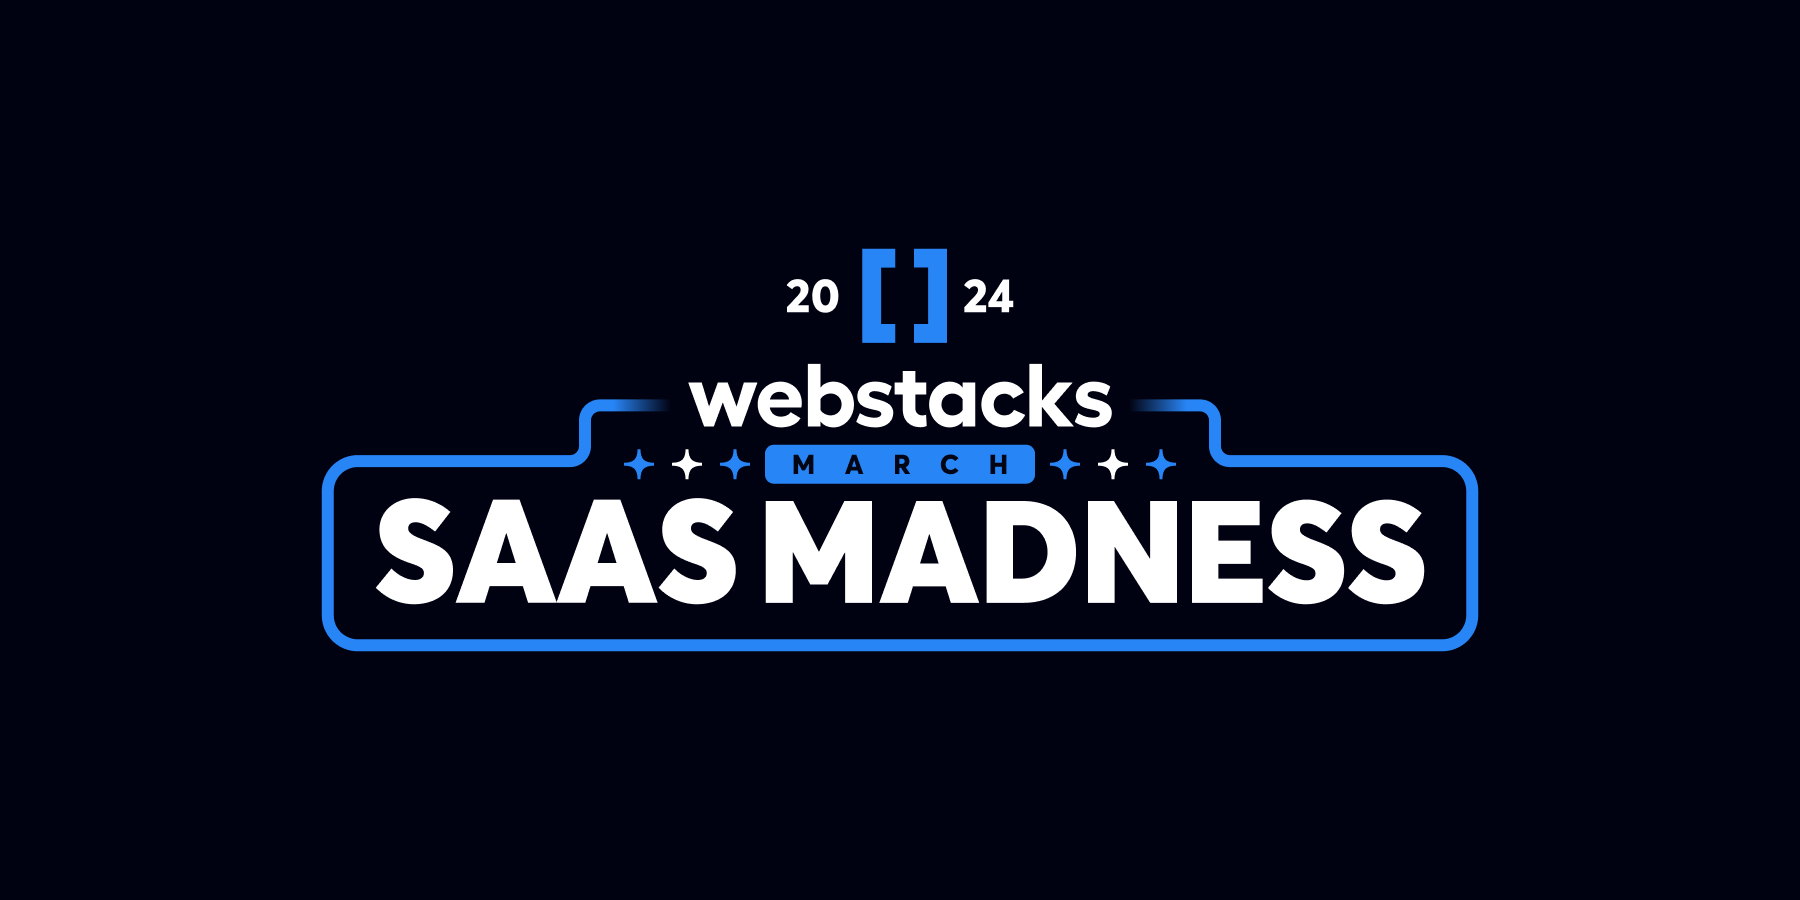 Welcome to Webstacks March SaaS Madness '24 🏆